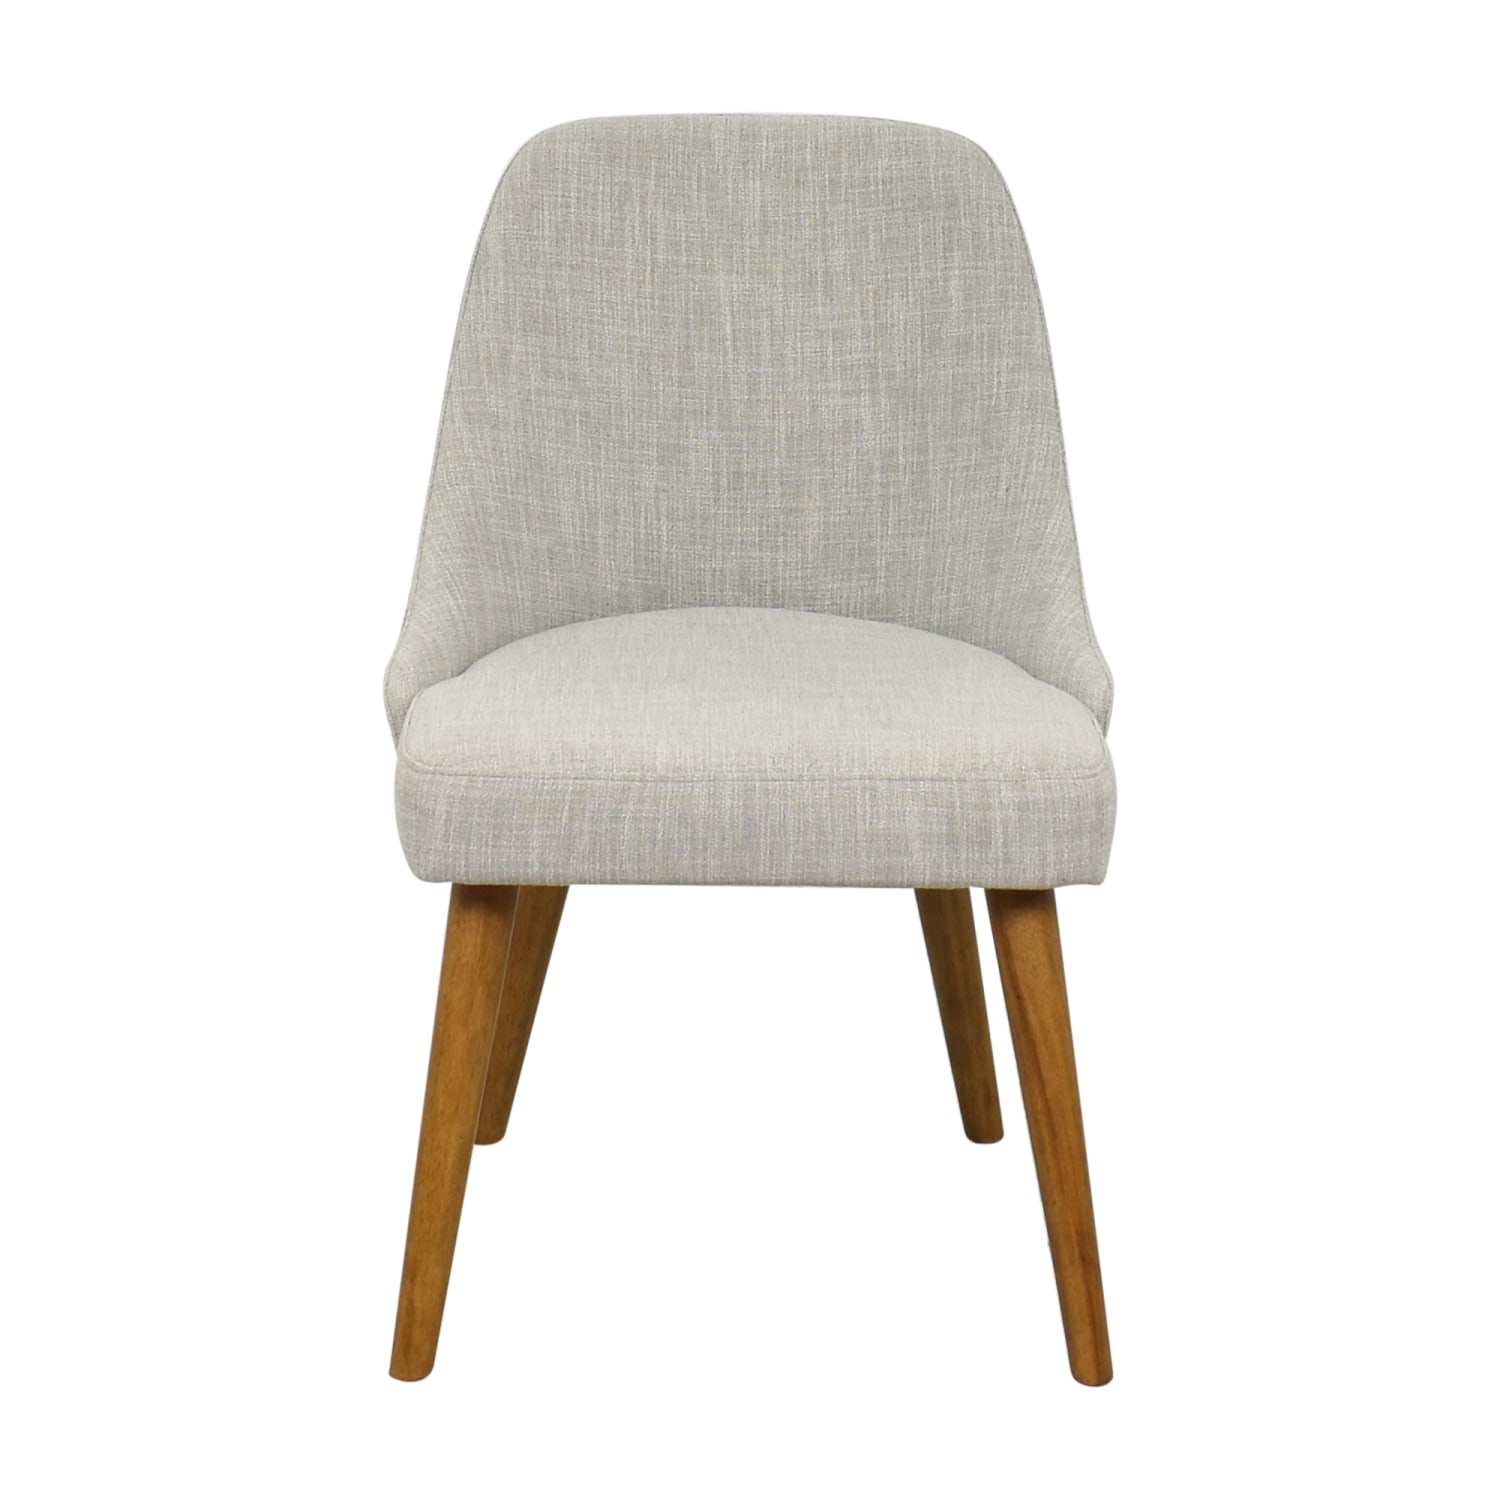 West Elm West Elm Mid-Century Upholstered Dining Chair used